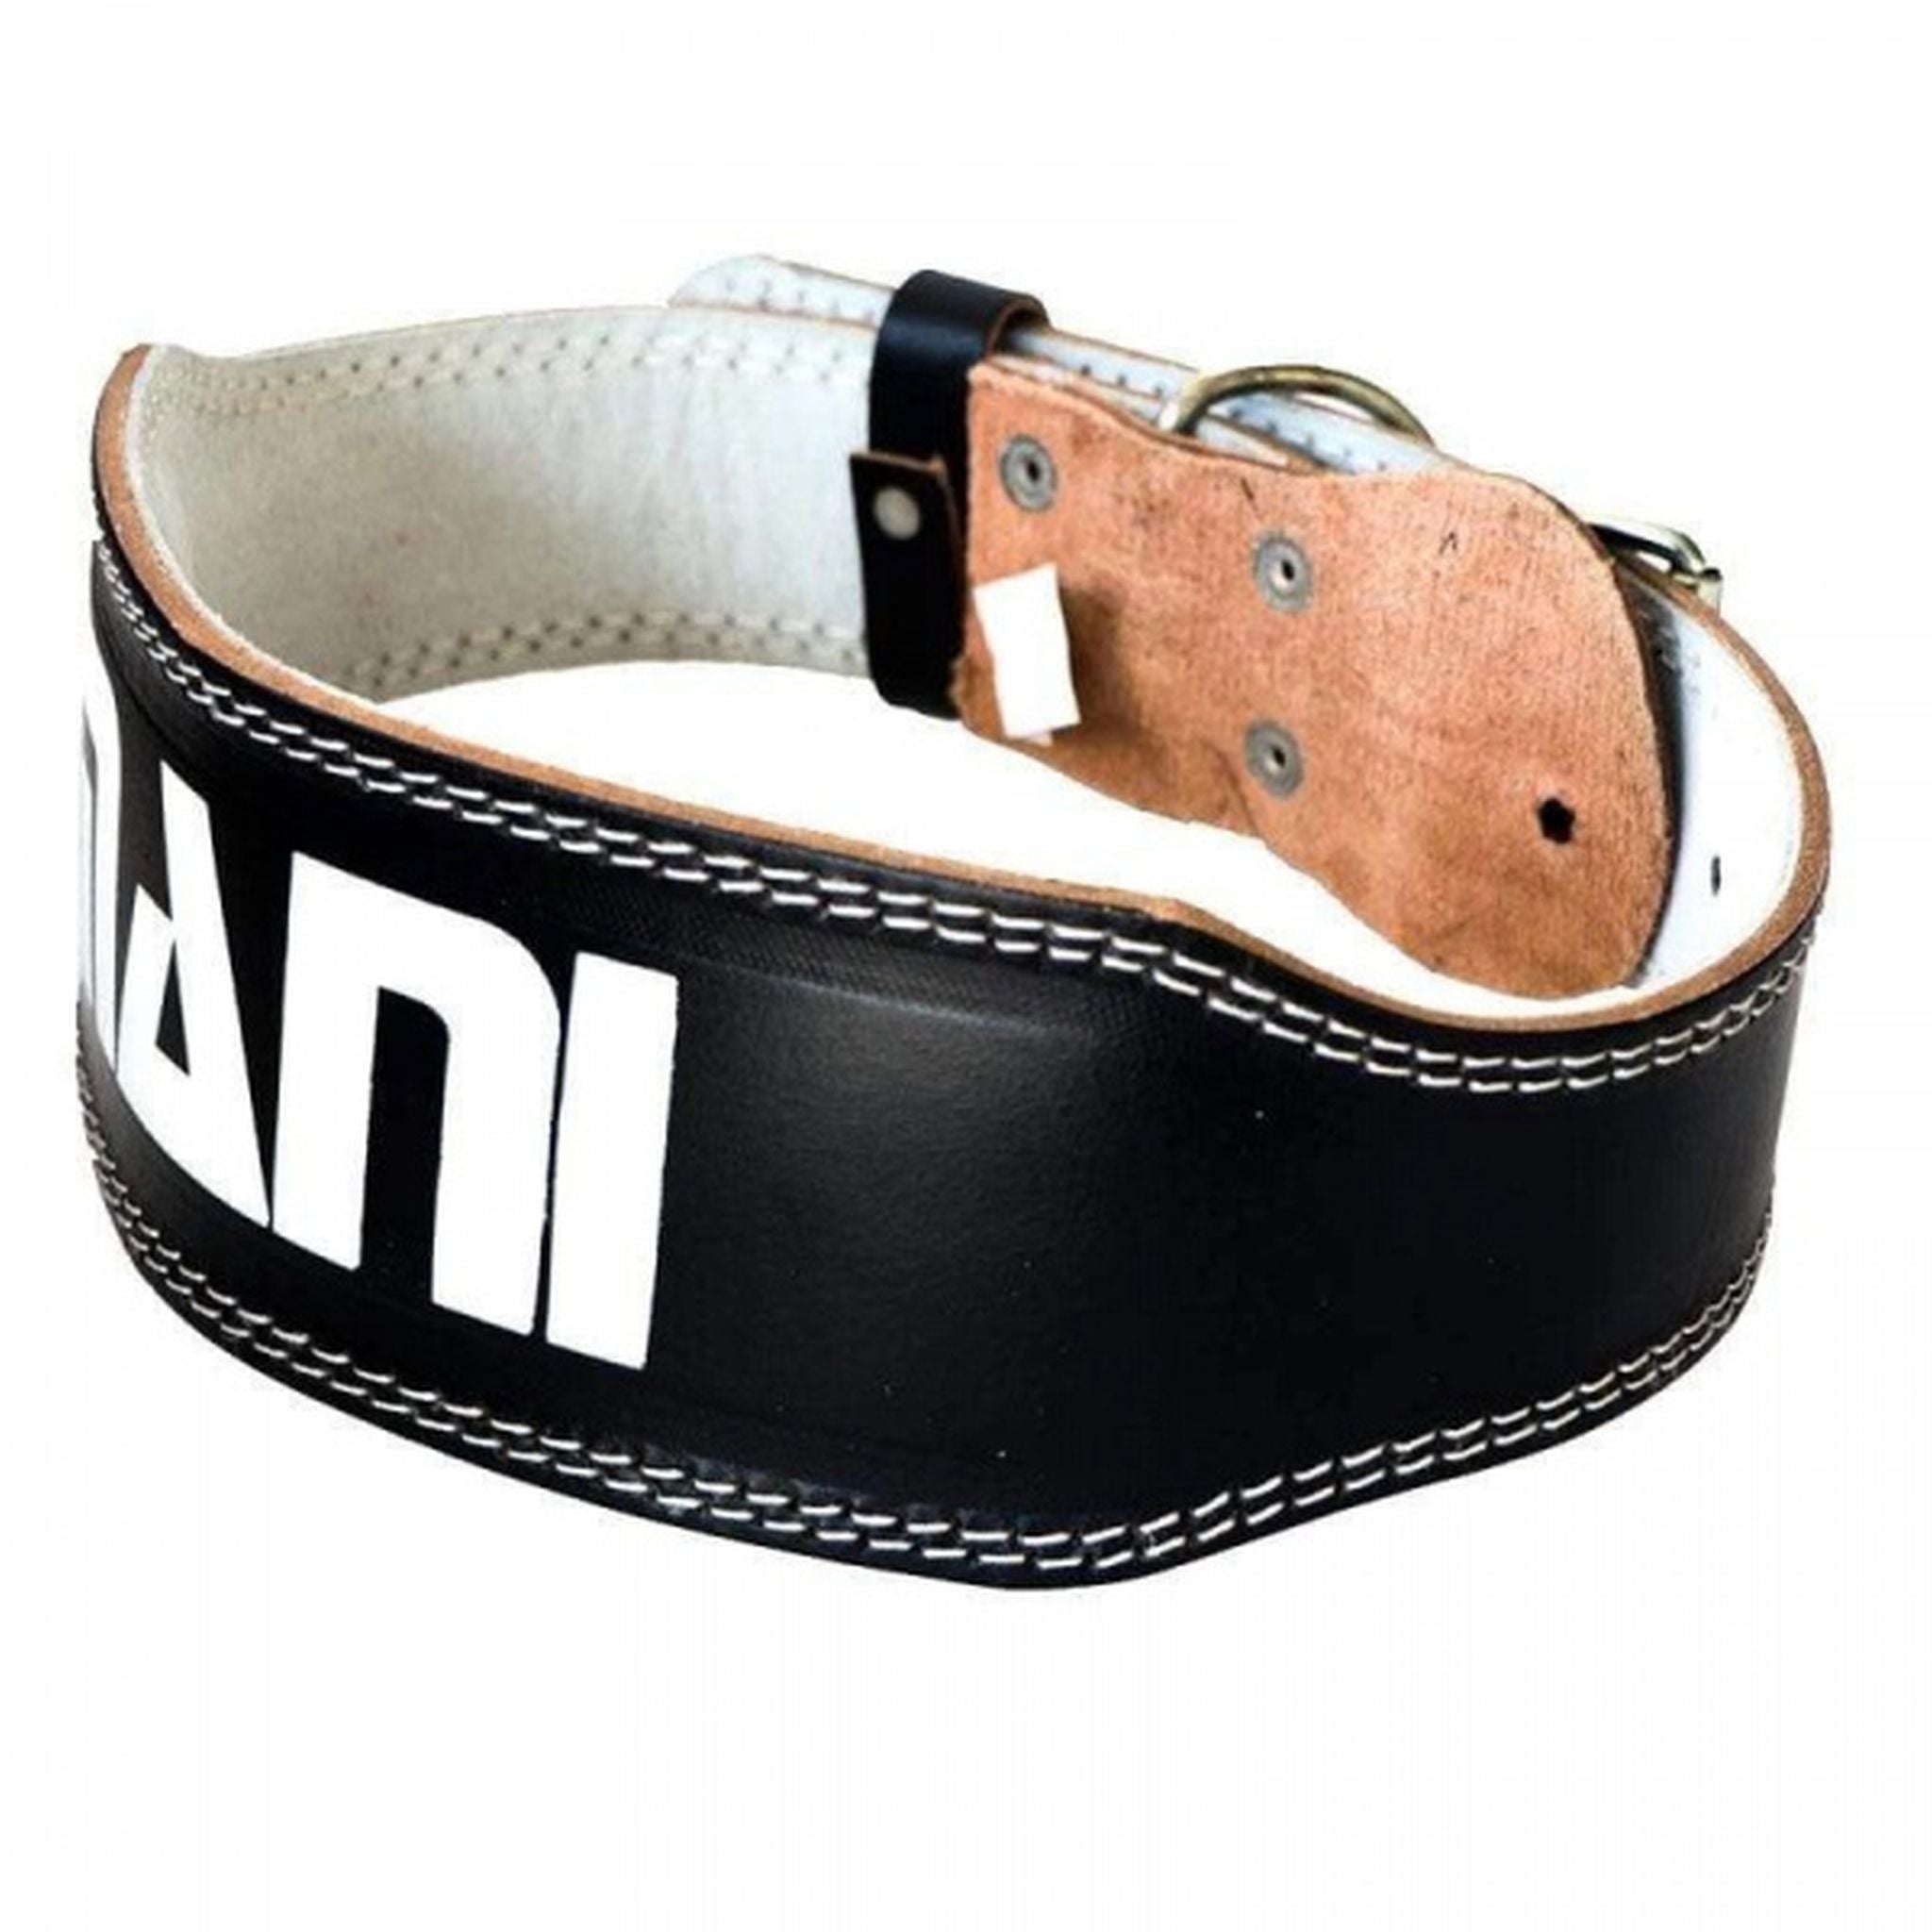 Mani Deluxe 4-inch Padded Leather Weight Belt